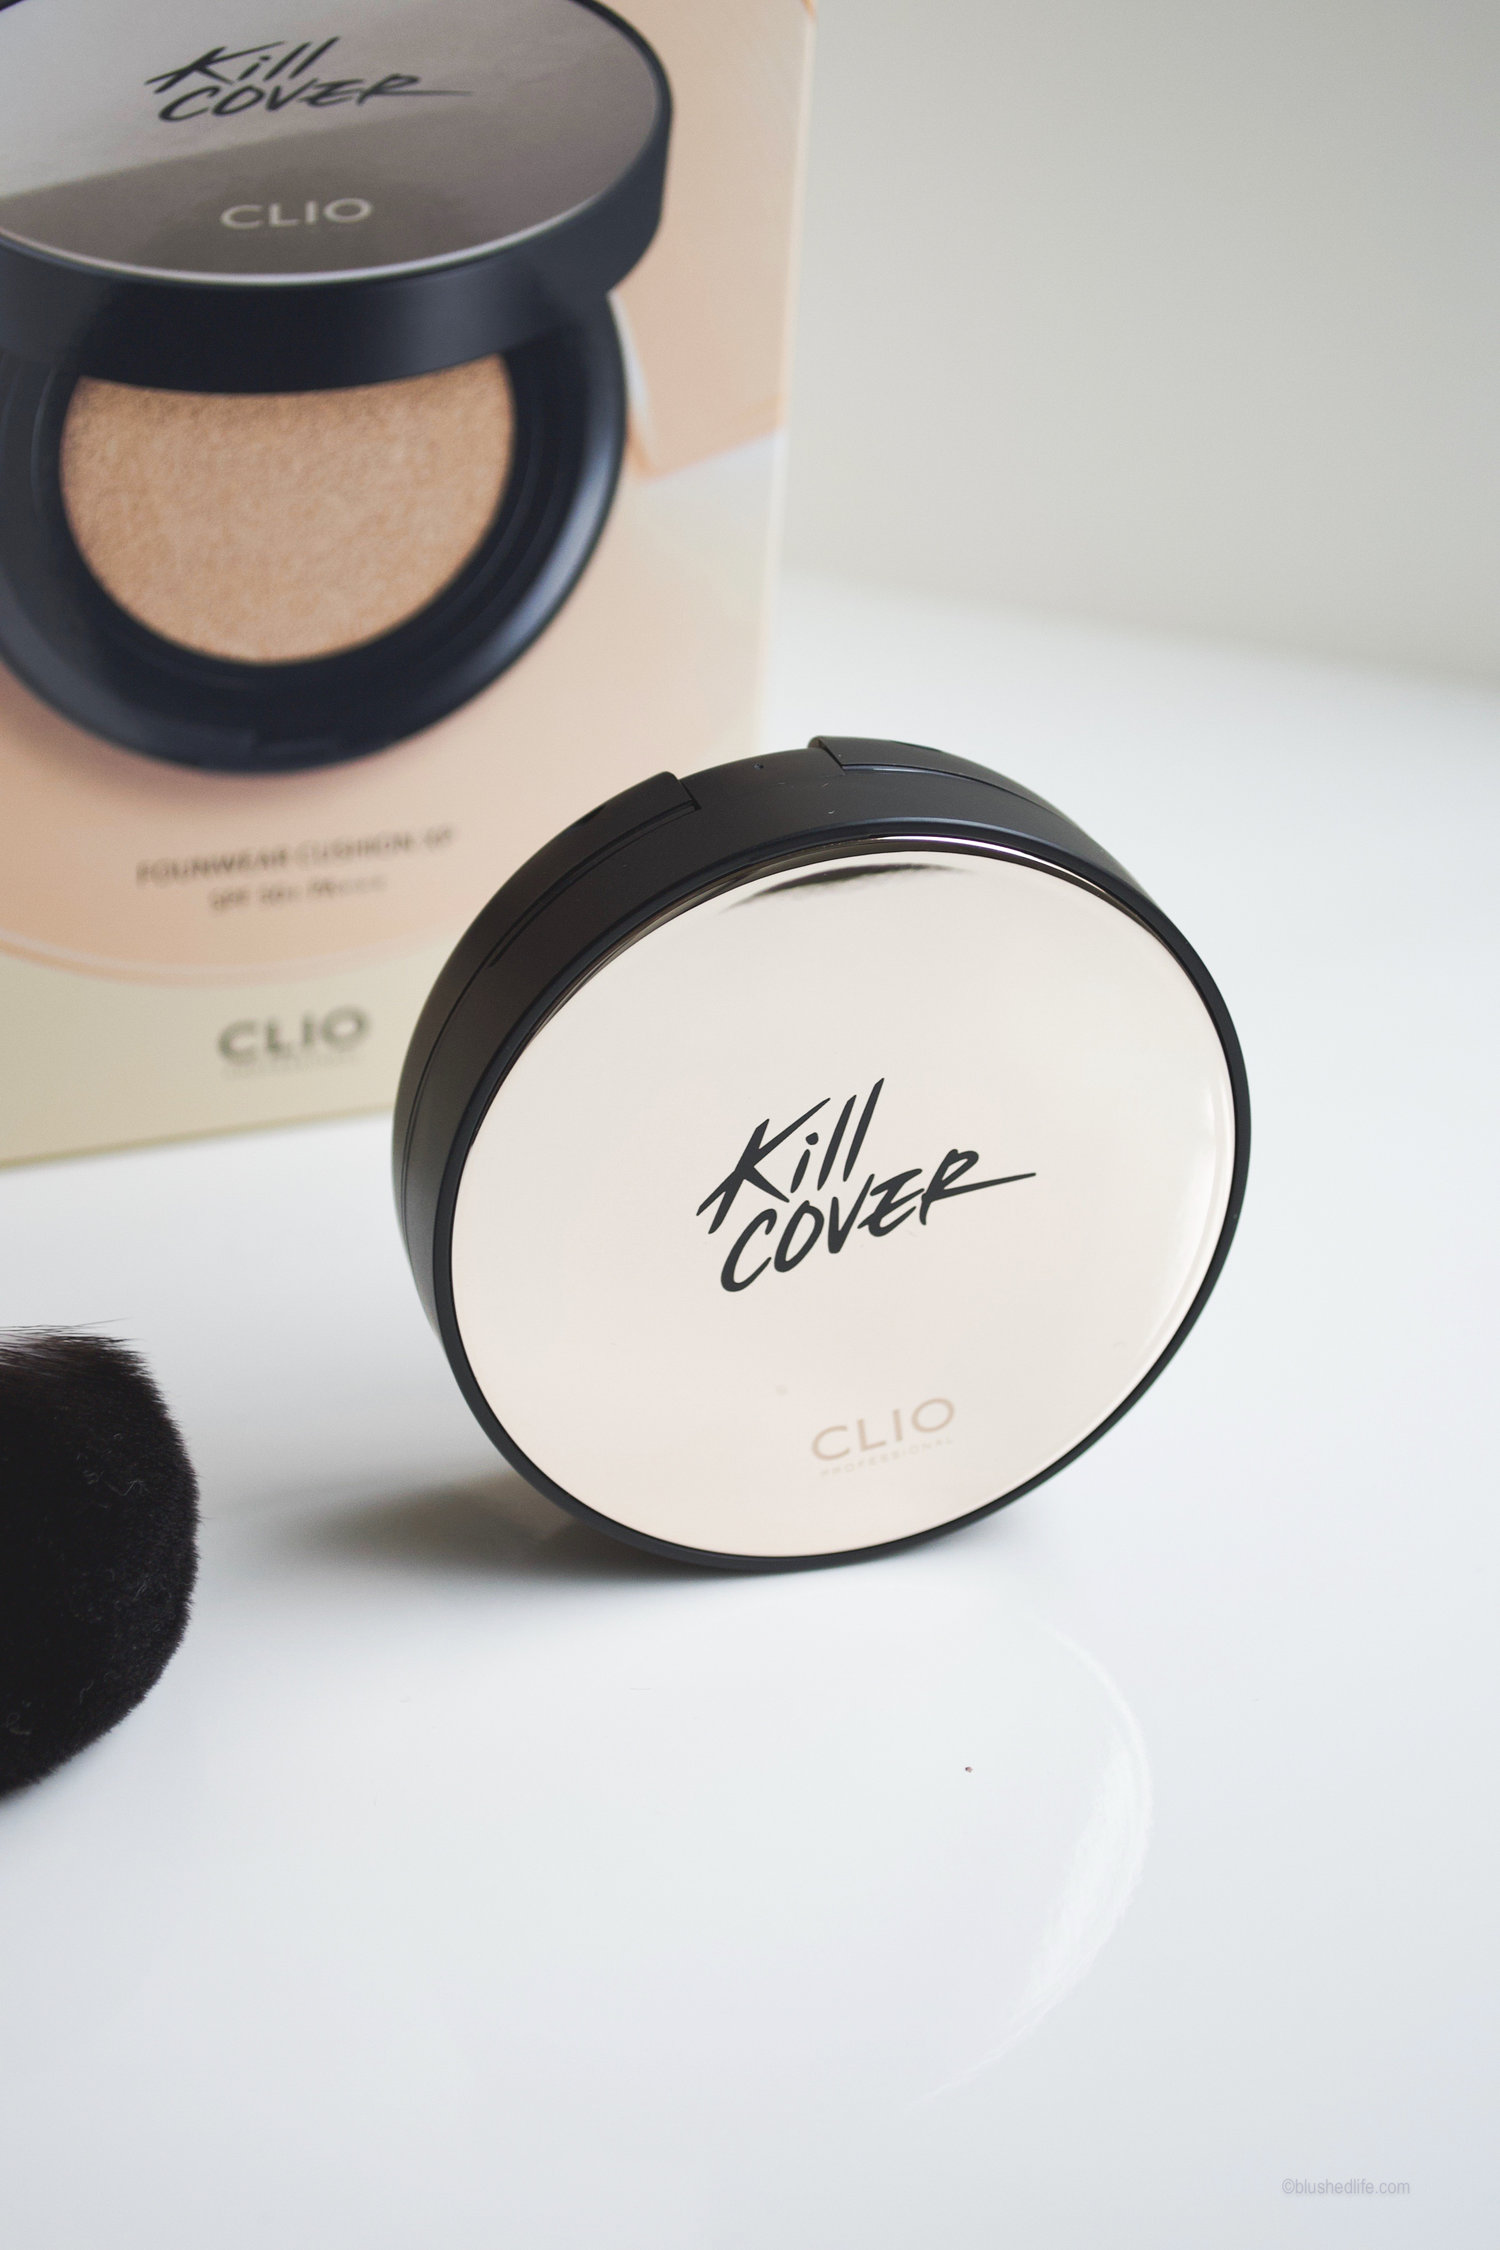 Clio Kill Cover Founwear Cushion XP Foundation Review — Valerie Tang